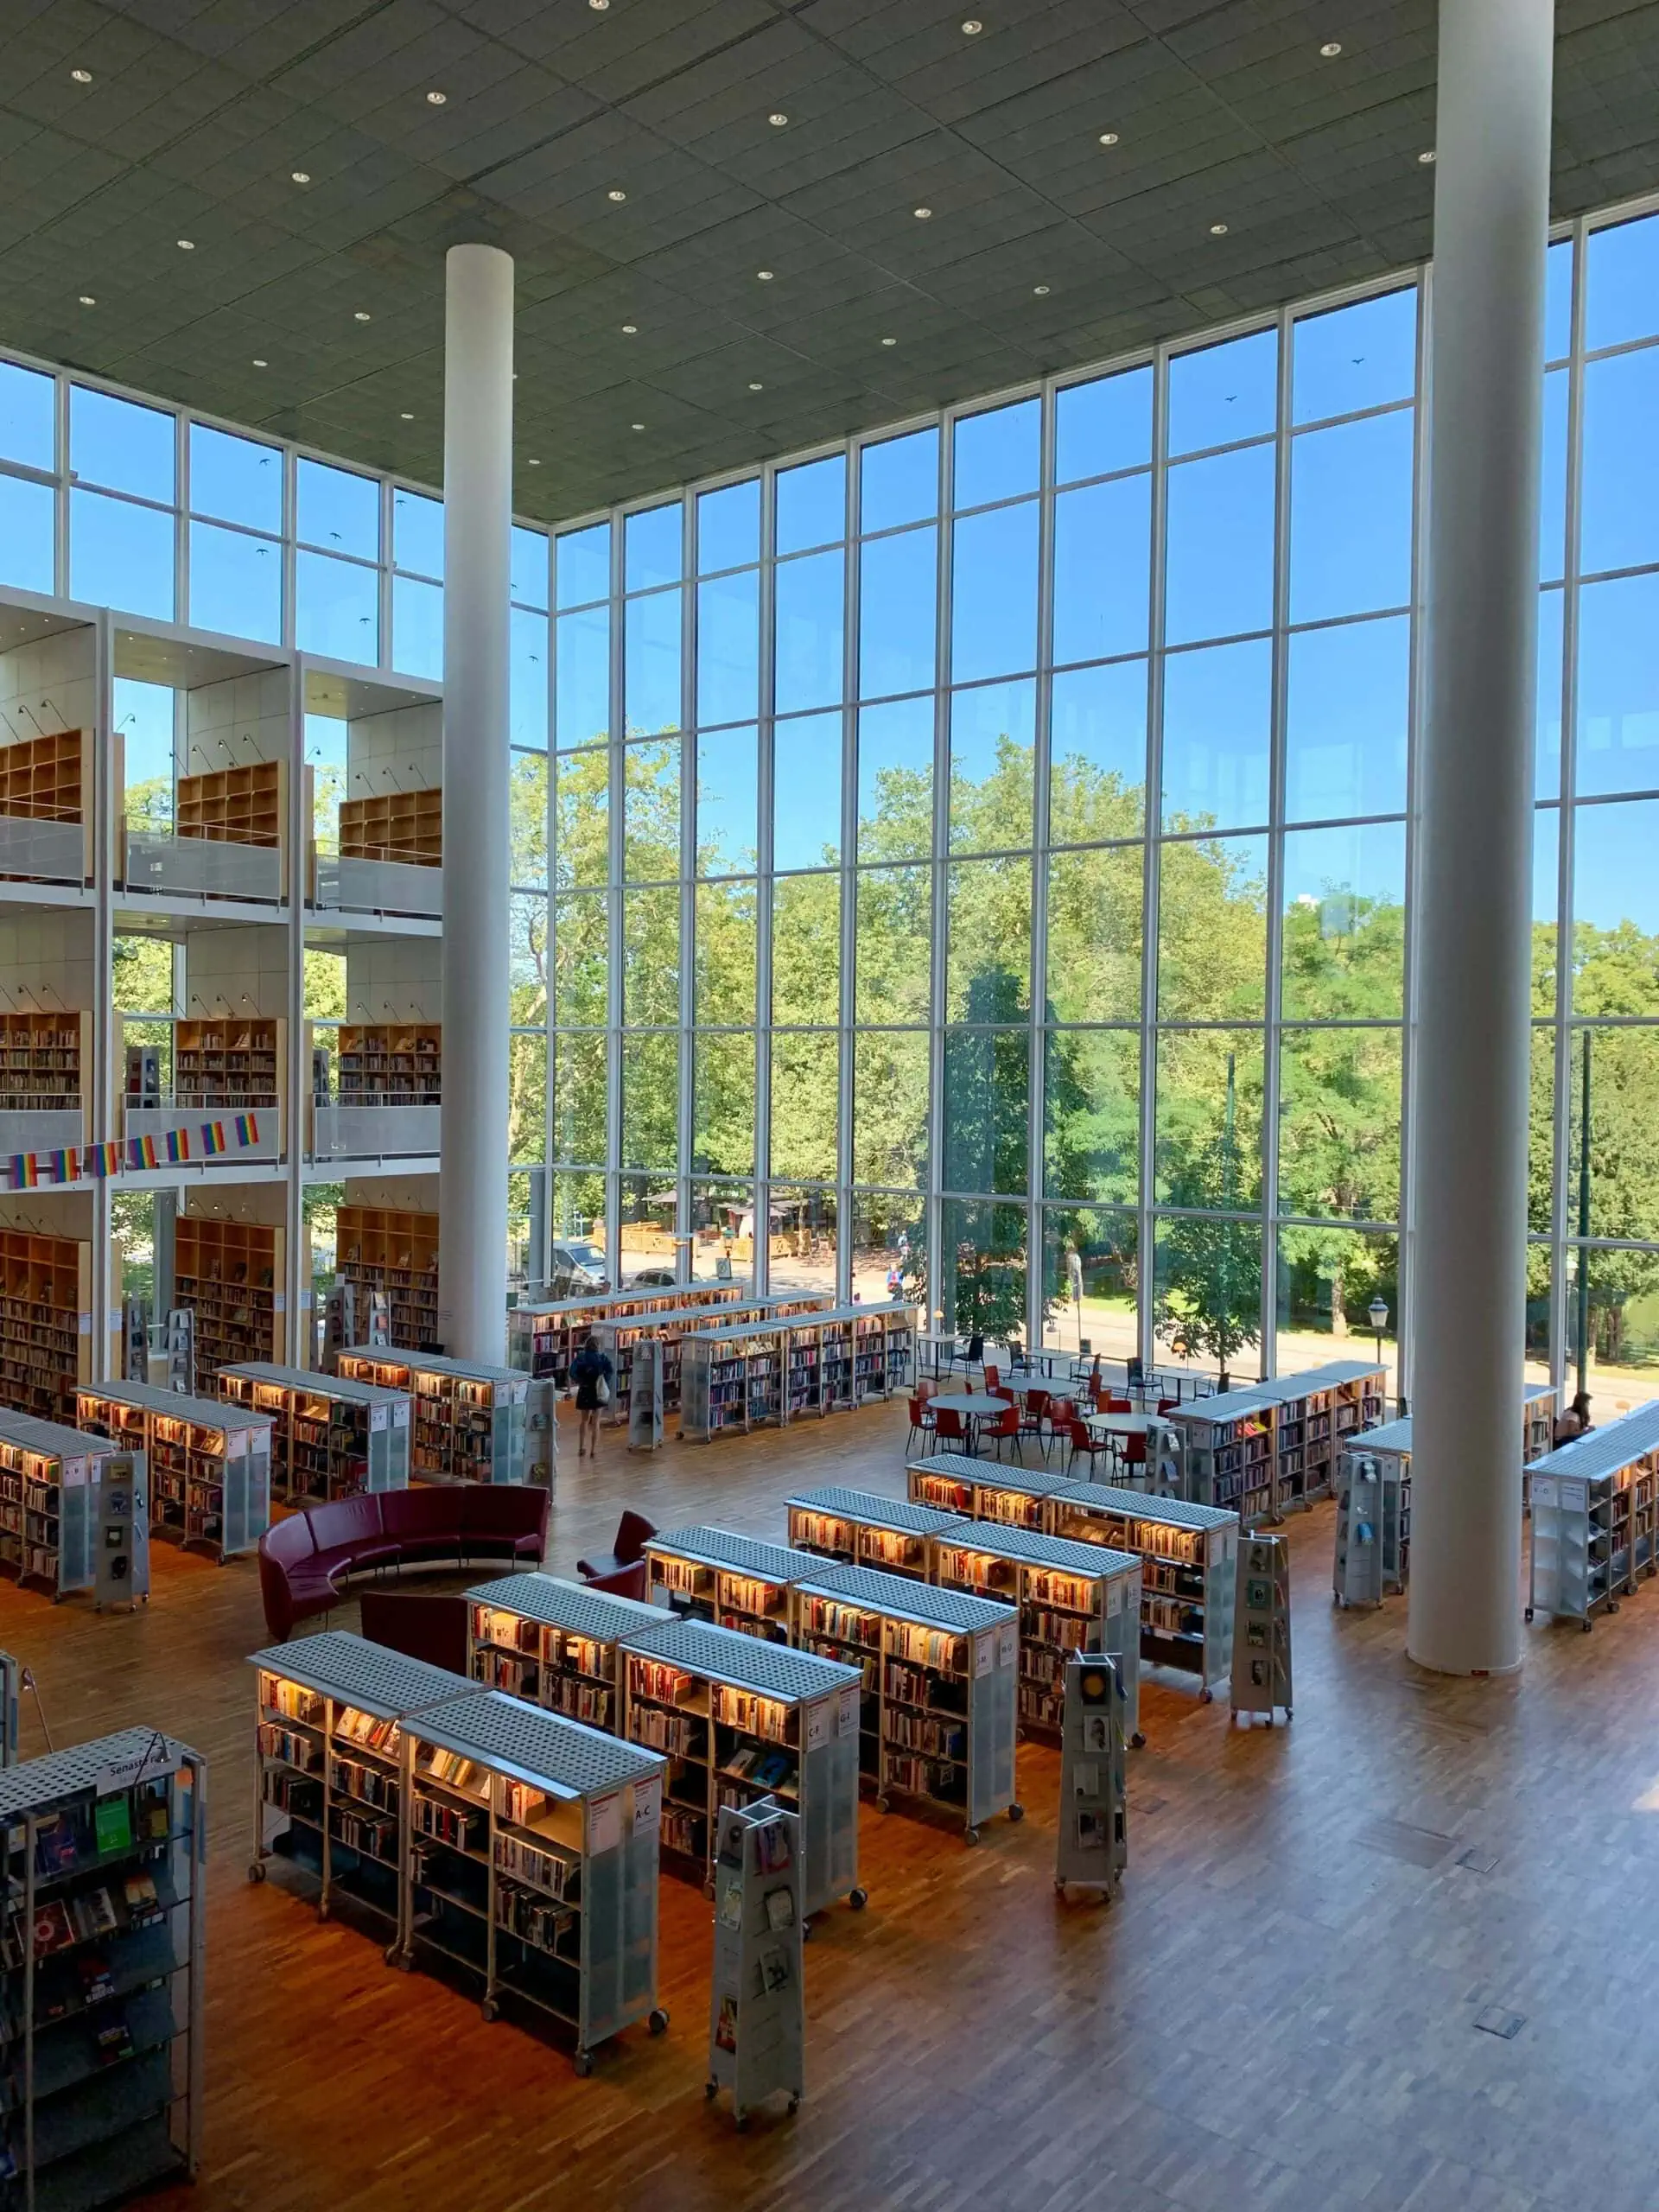 University library monitored with live video surveillance